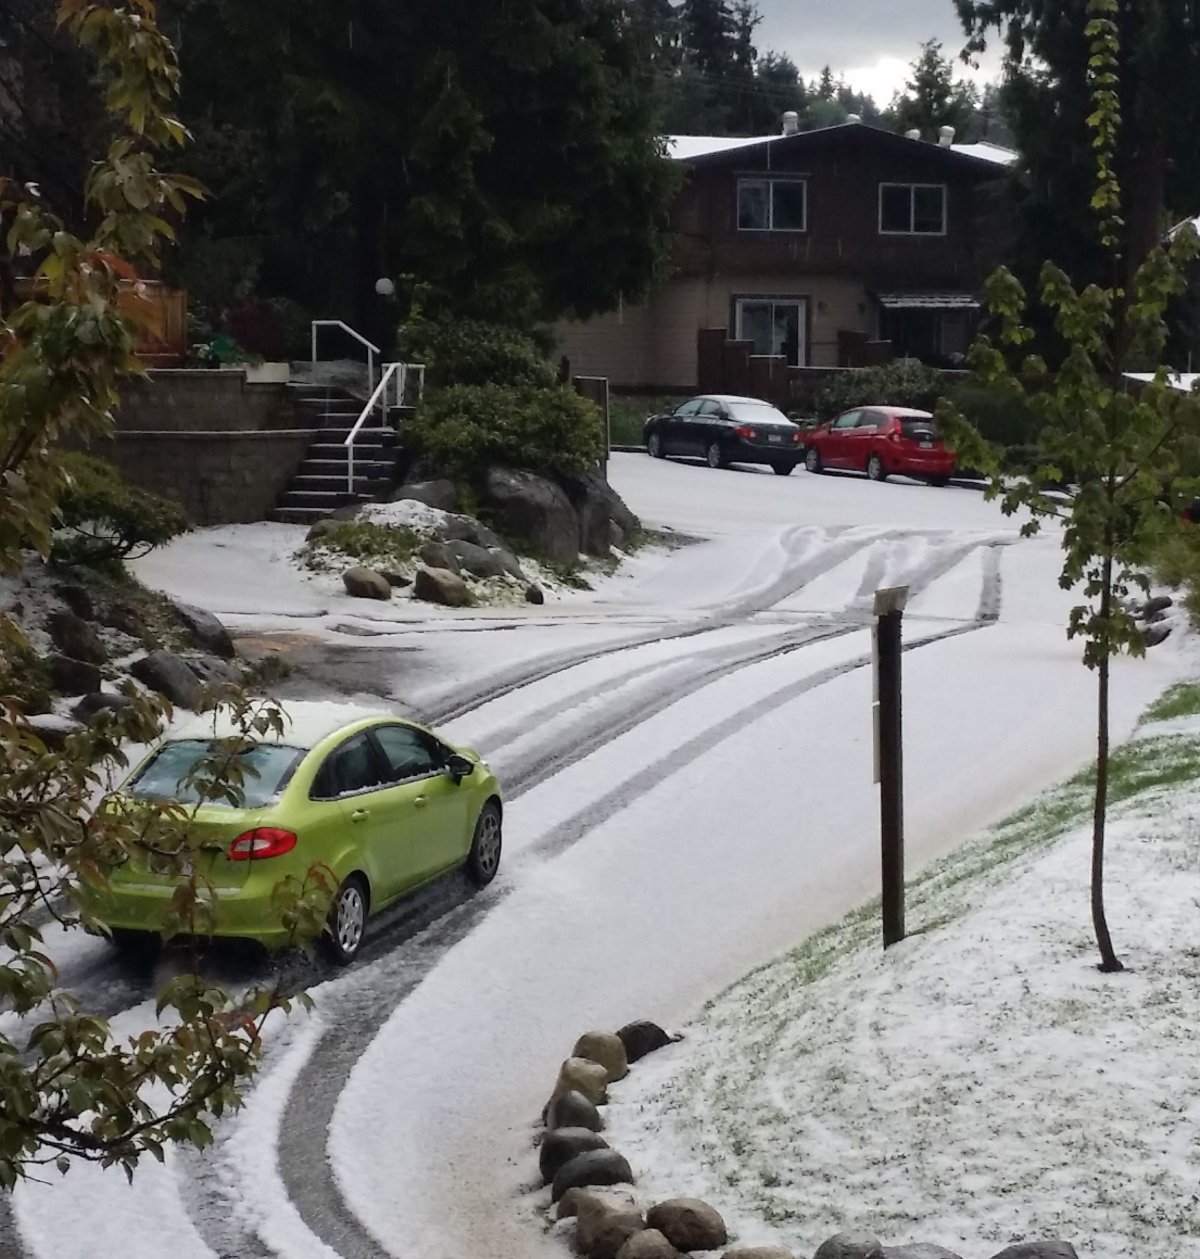 This shot from Port Moody shows just how much hail fell over a short time Friday afternoon as a storm passed through the region.